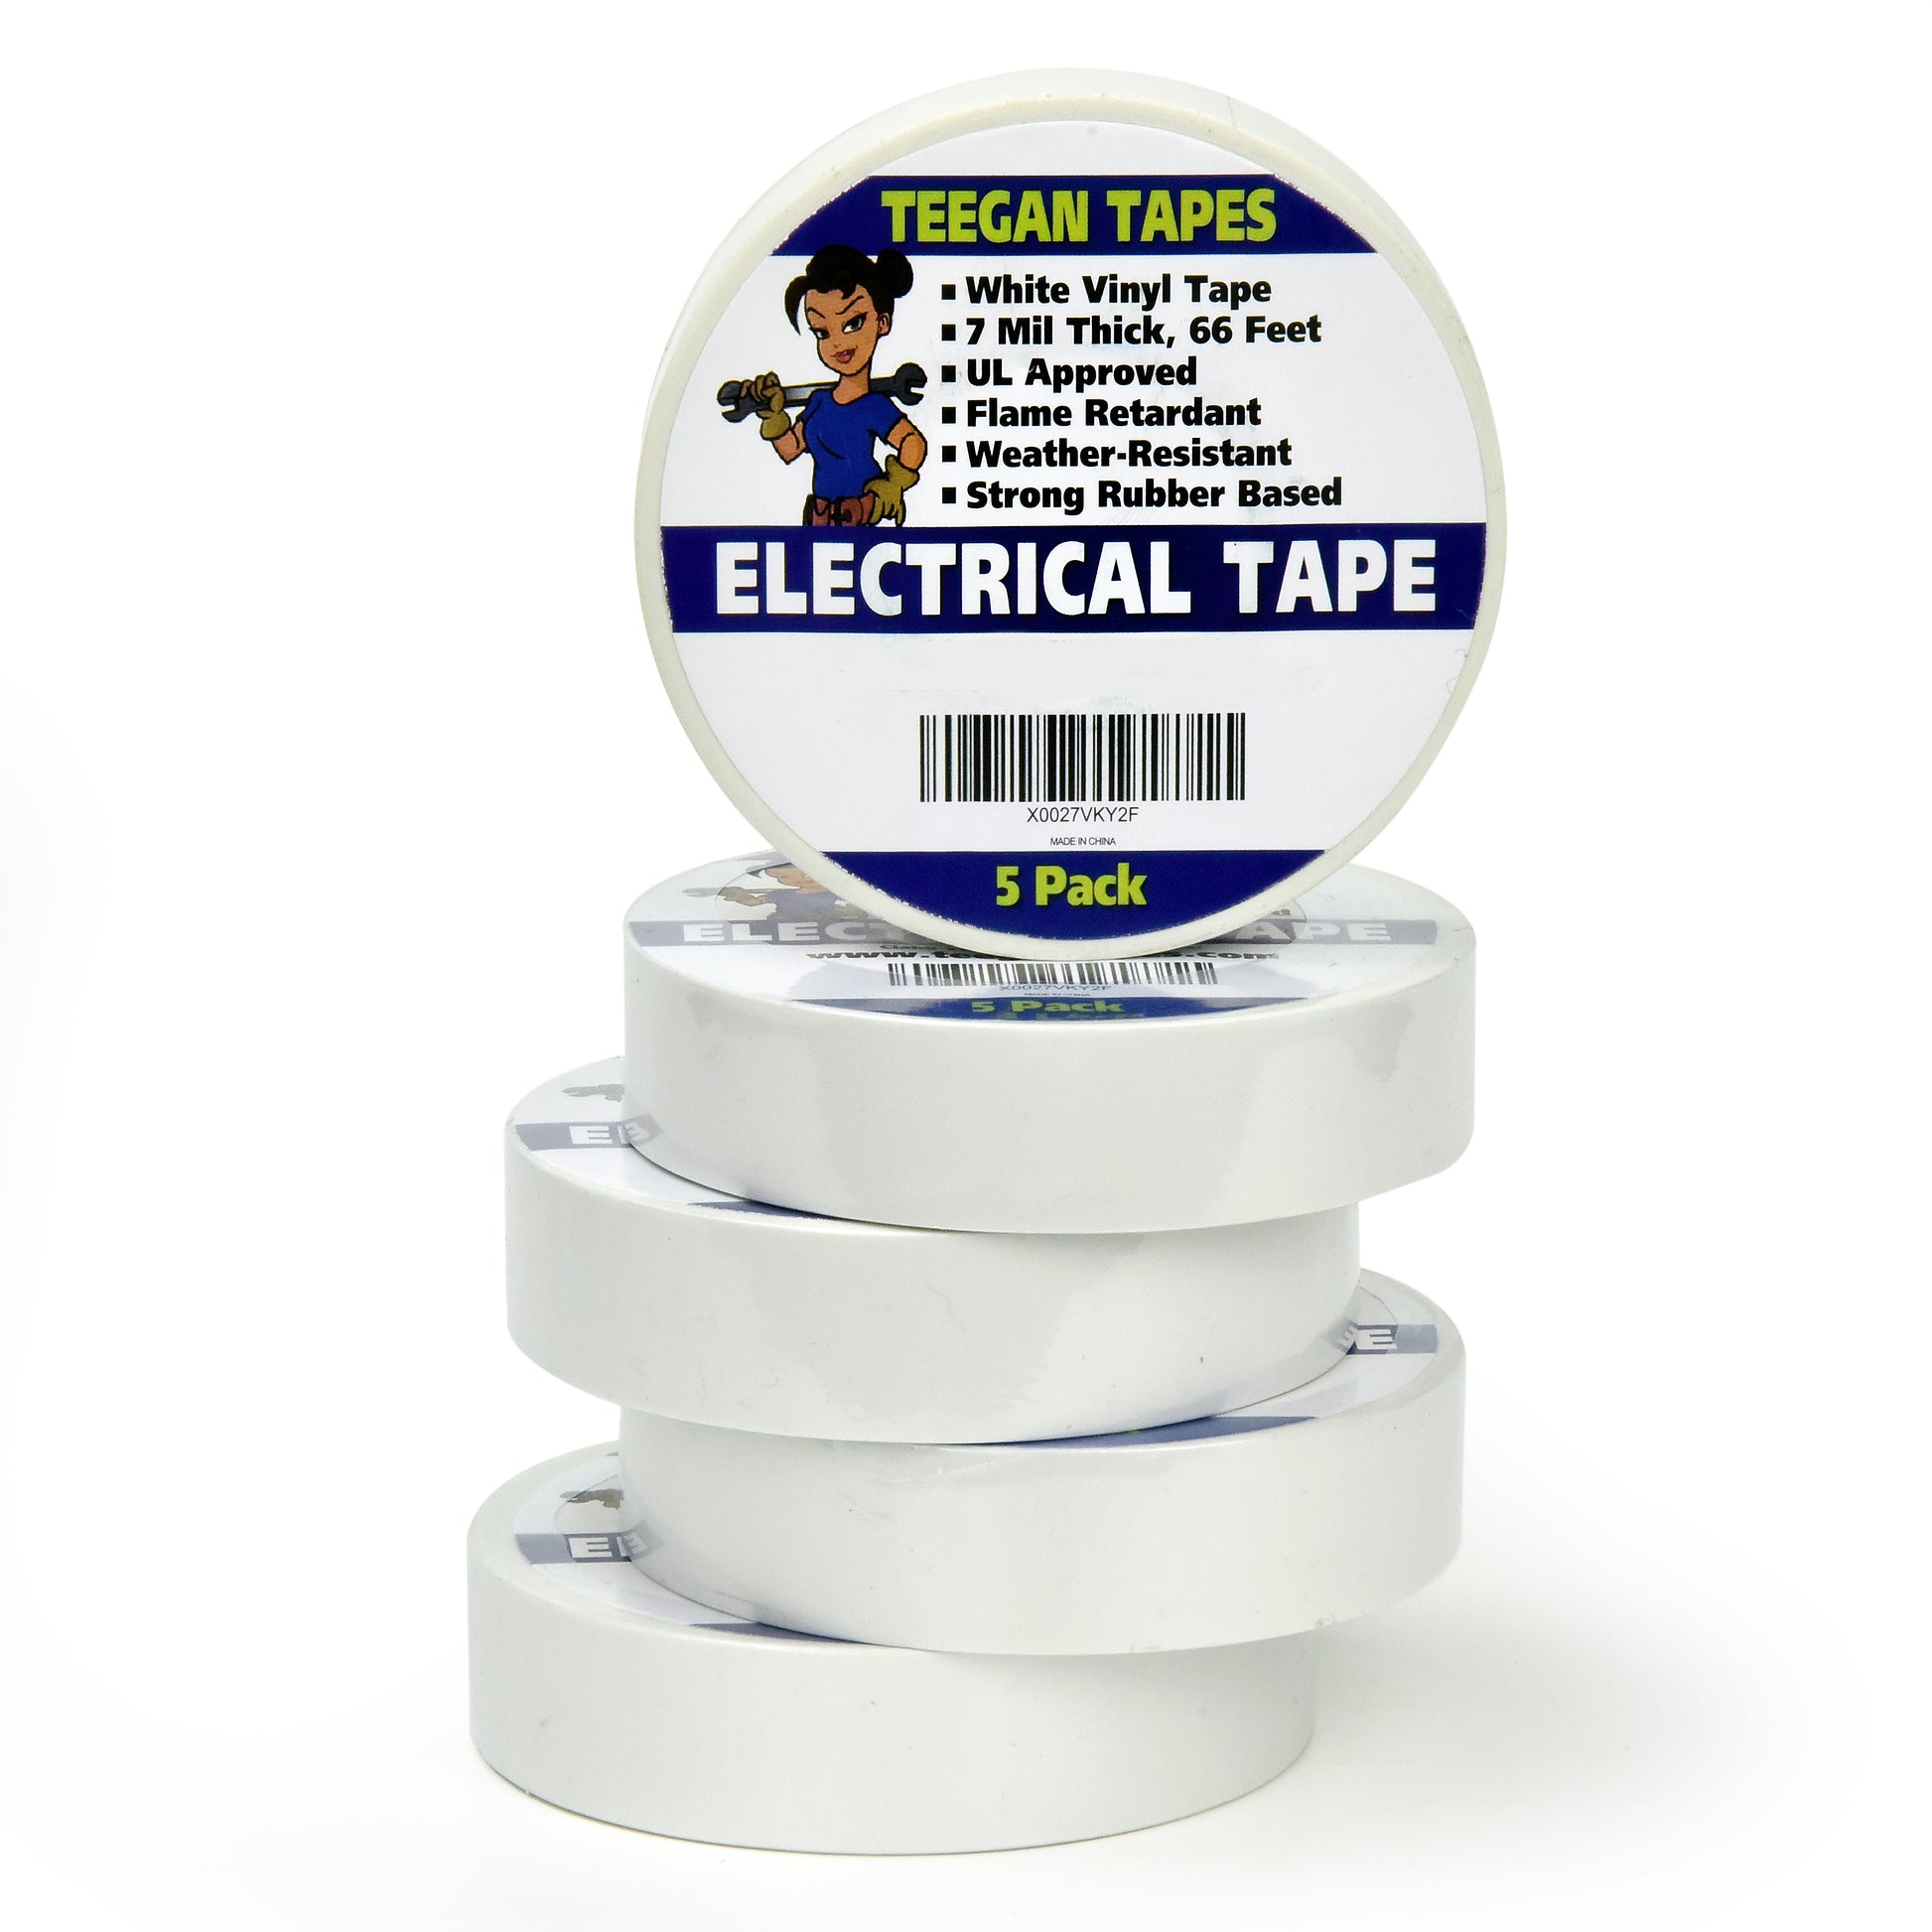 Gaffer Power White Electrical Tape - Vinyl Electric Tape (5 Pack) | 7 Mil Thick Vinyl Tape 3/4 inch Wide 66 Foot Long Roll | Strong Rubber